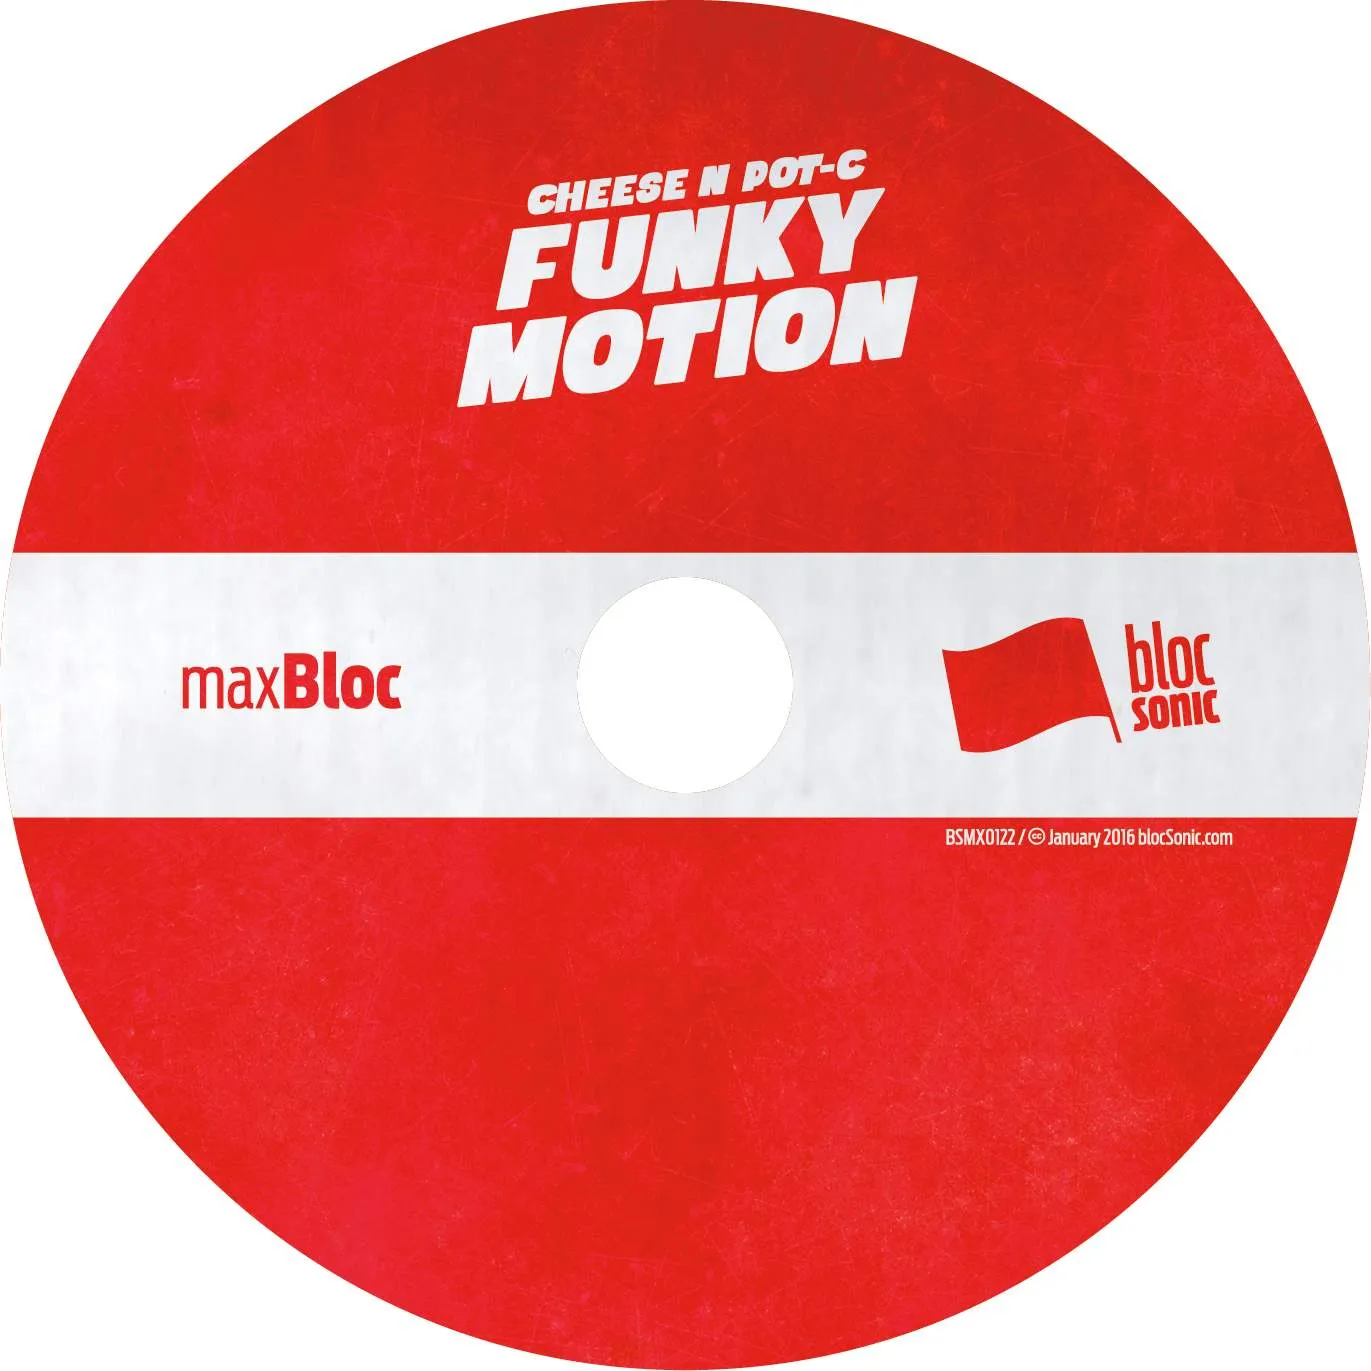 Album disc for “Funky Motion” by Cheese N Pot-C